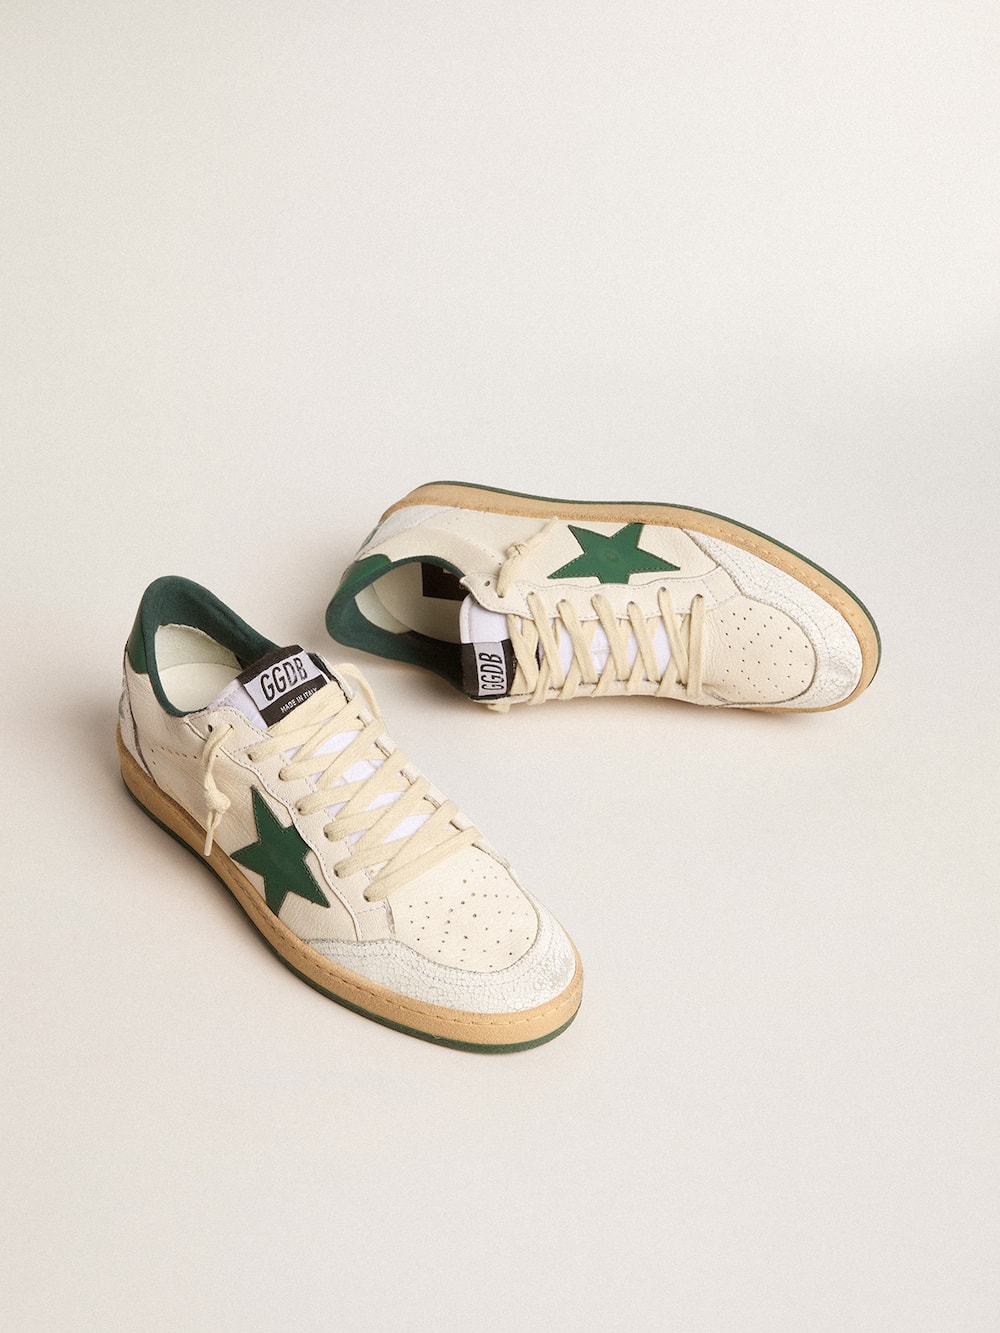 Golden Goose - Women's Ball Star Wishes in white nappa leather with green leather star and heel tab in 